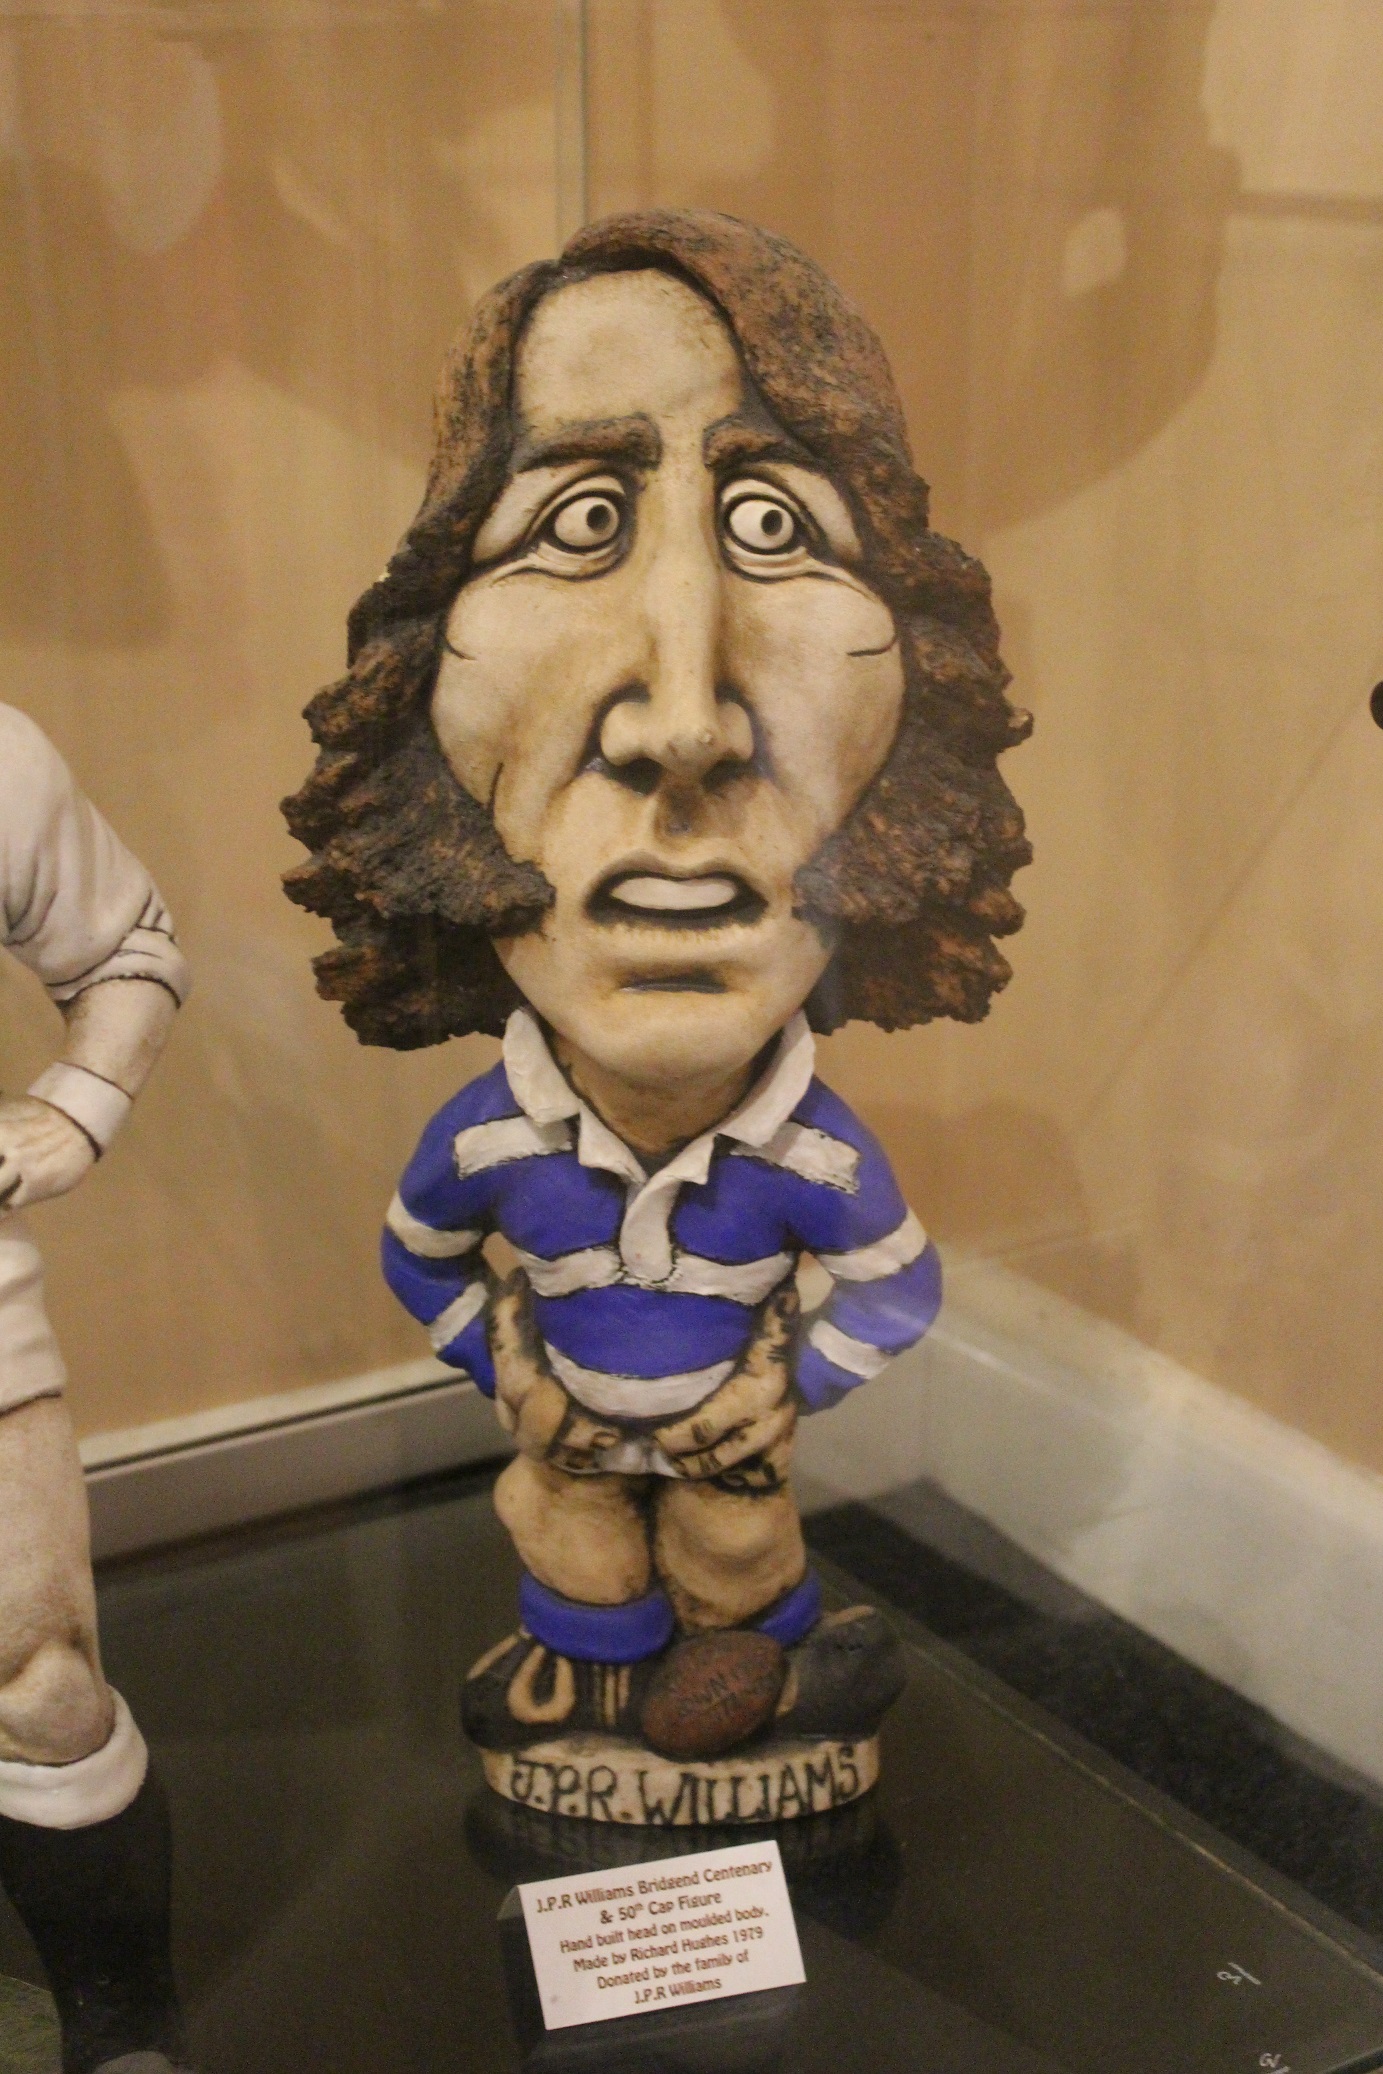 JPR Williams in Bridgend Kit - Currently on display at the Grogg shop - Rugby Memorabilia Society